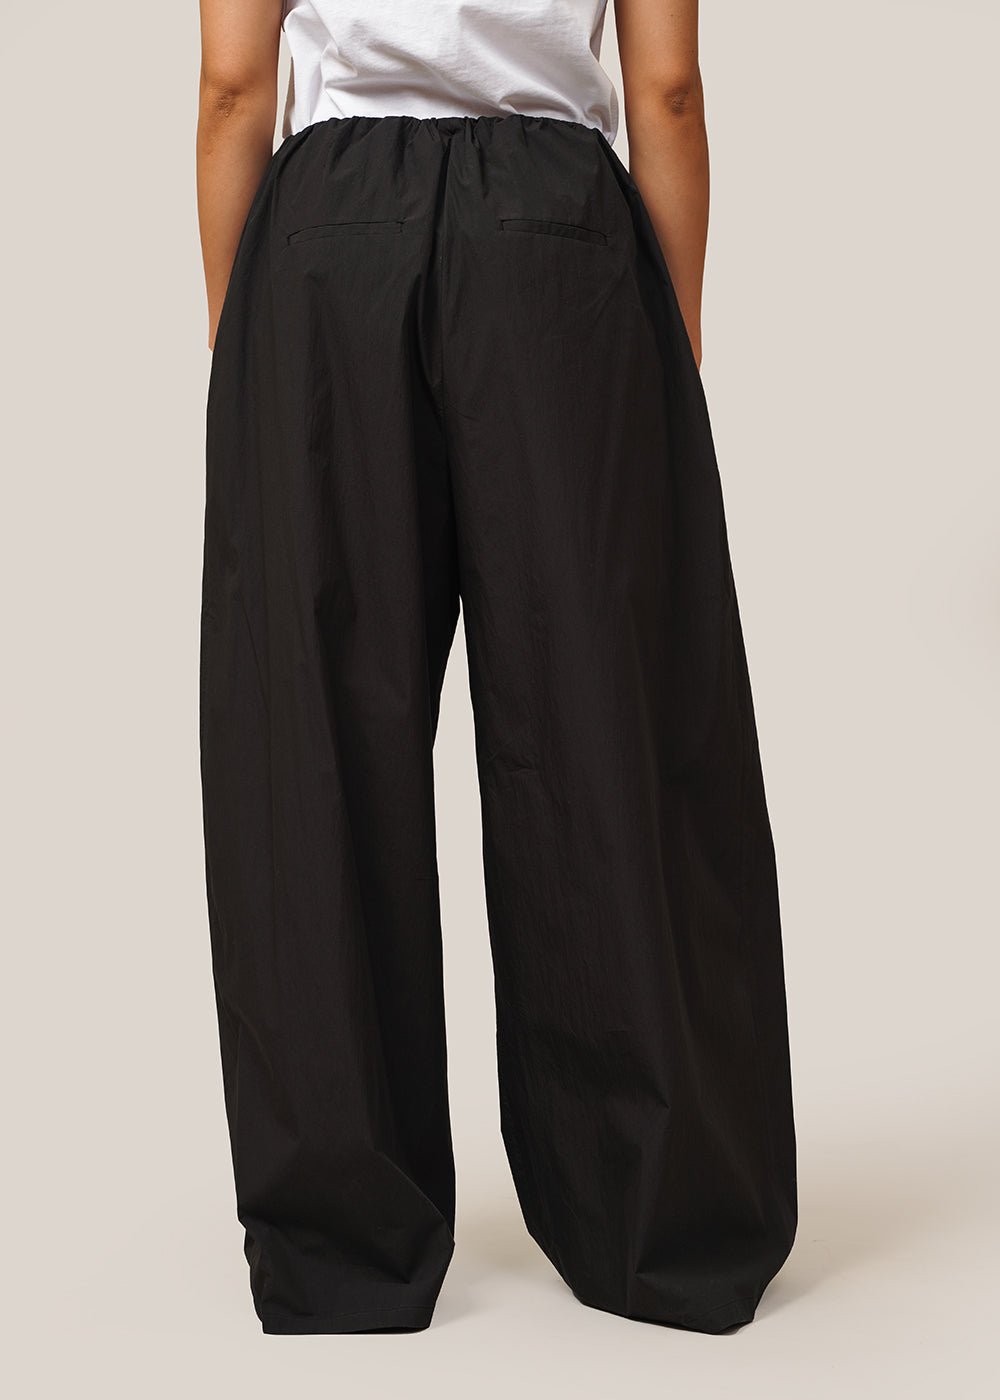 Cotton Banding Wide Pants in Black by AMOMENTO – New Classics Studios